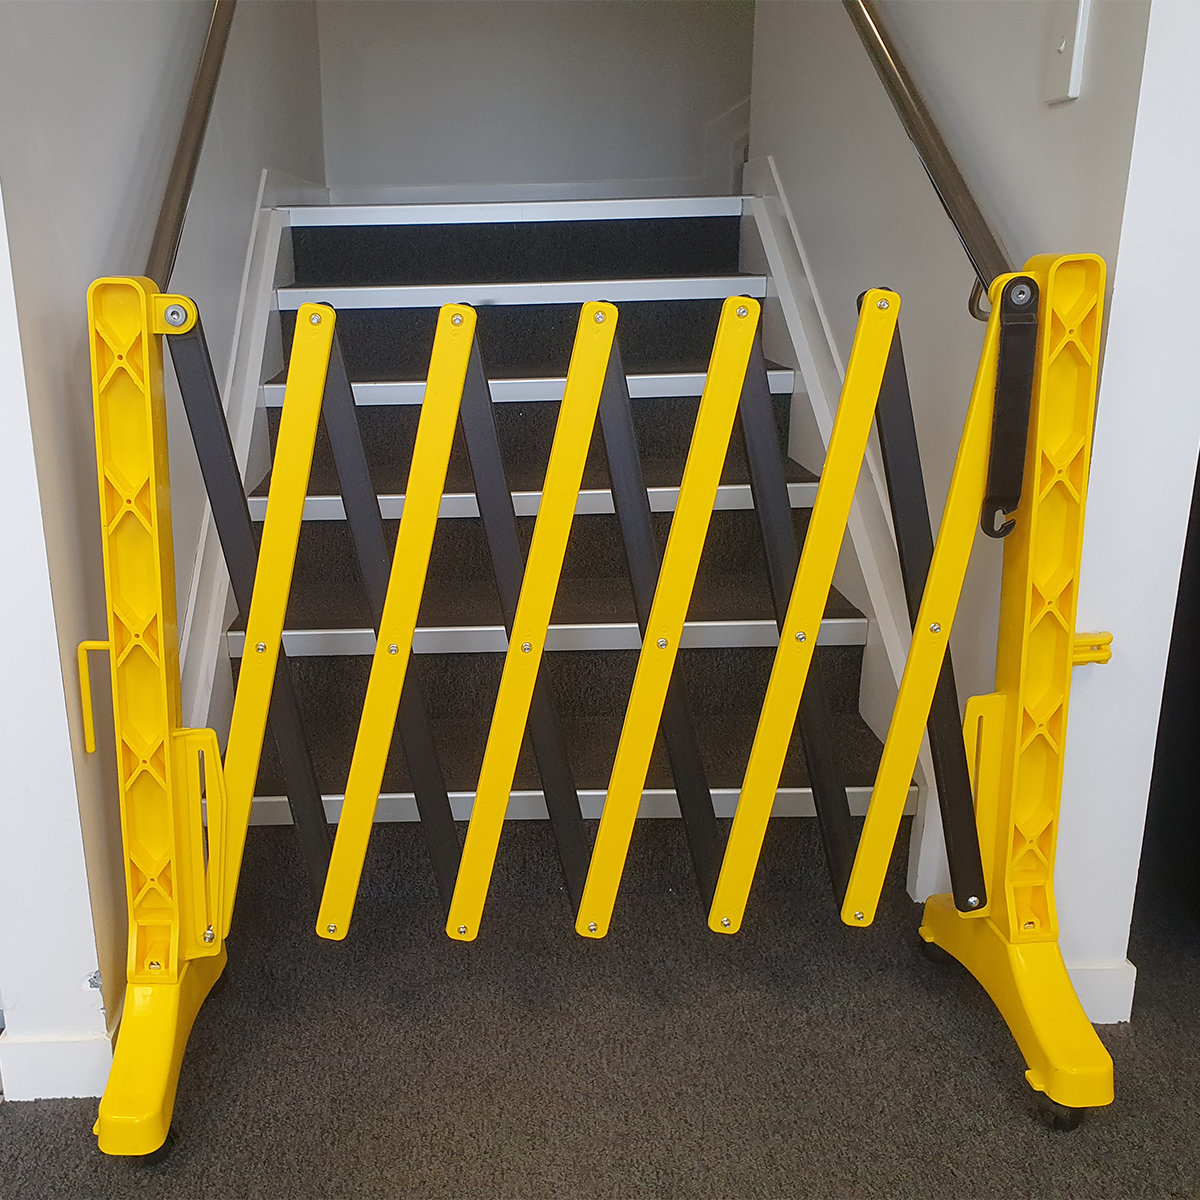 Buy Expandable Mobile Barrier Gate in Expandable Barriers from GuardX available at Astrolift NZ